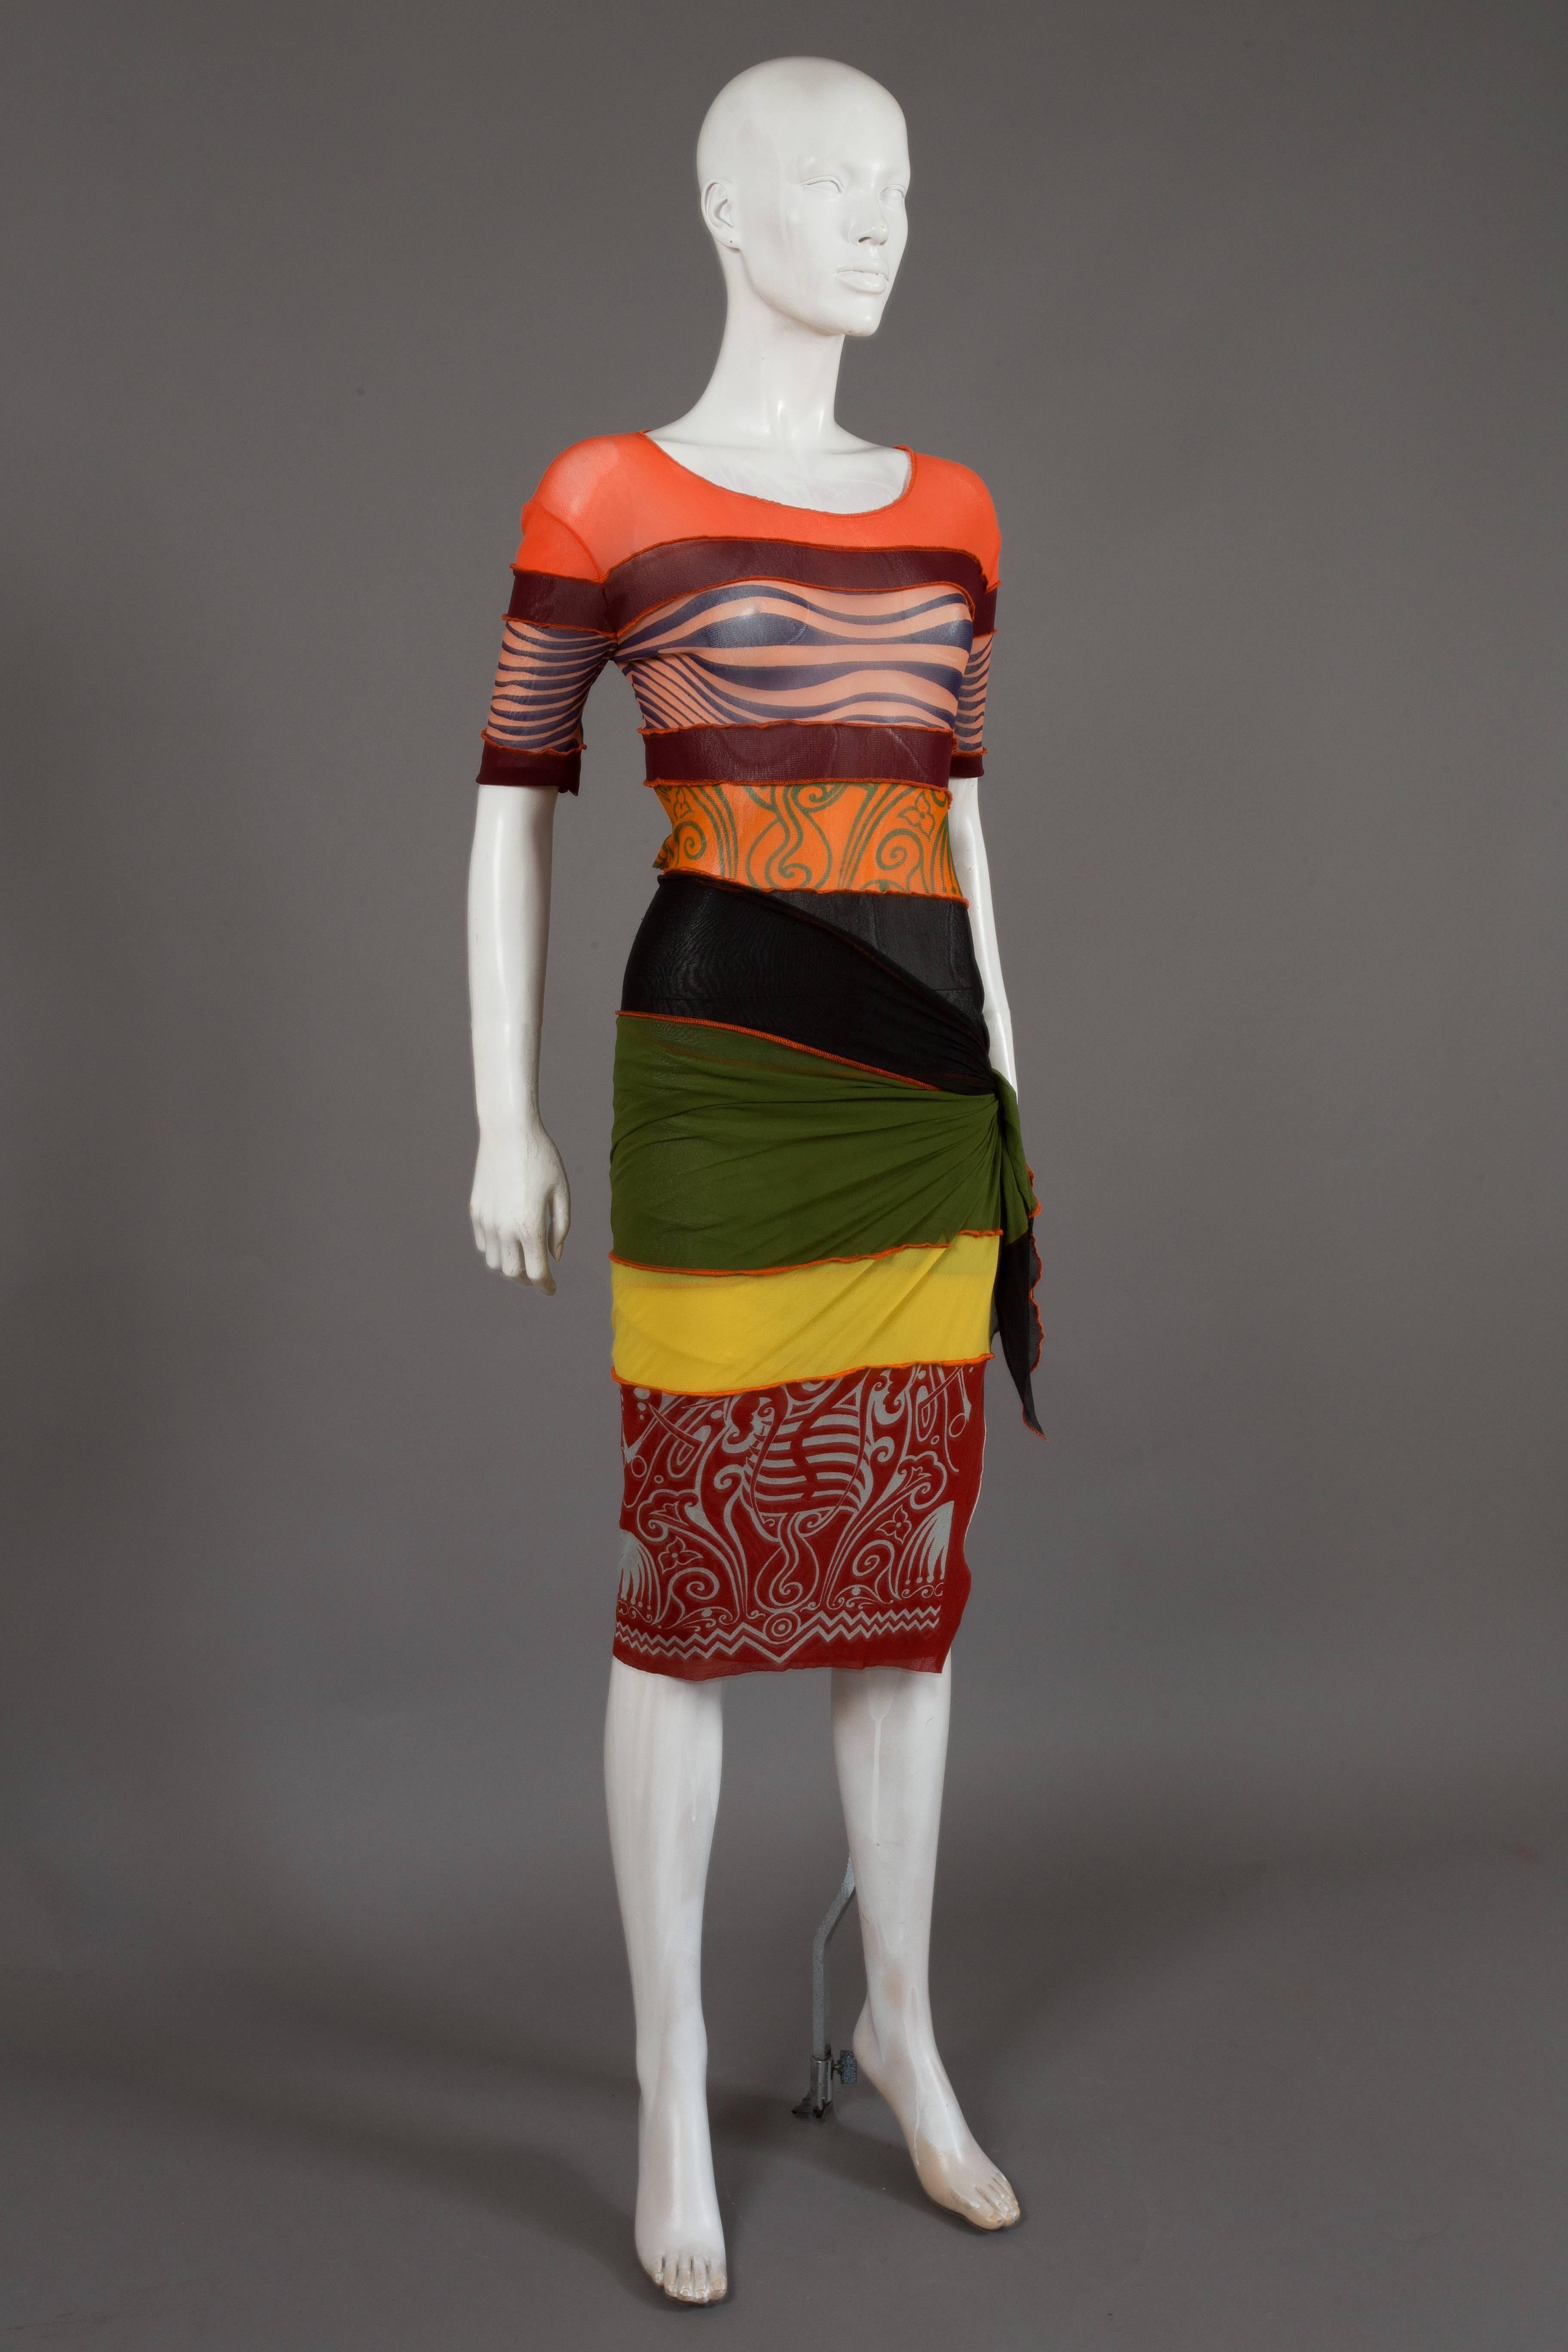 Iconic and rare Jean Paul Gaultier mesh pareo dress, spring/summer 1996. The dress features a patchwork mesh design featuring iconic Gaultier prints including the optical illusion breasts. 

Medium